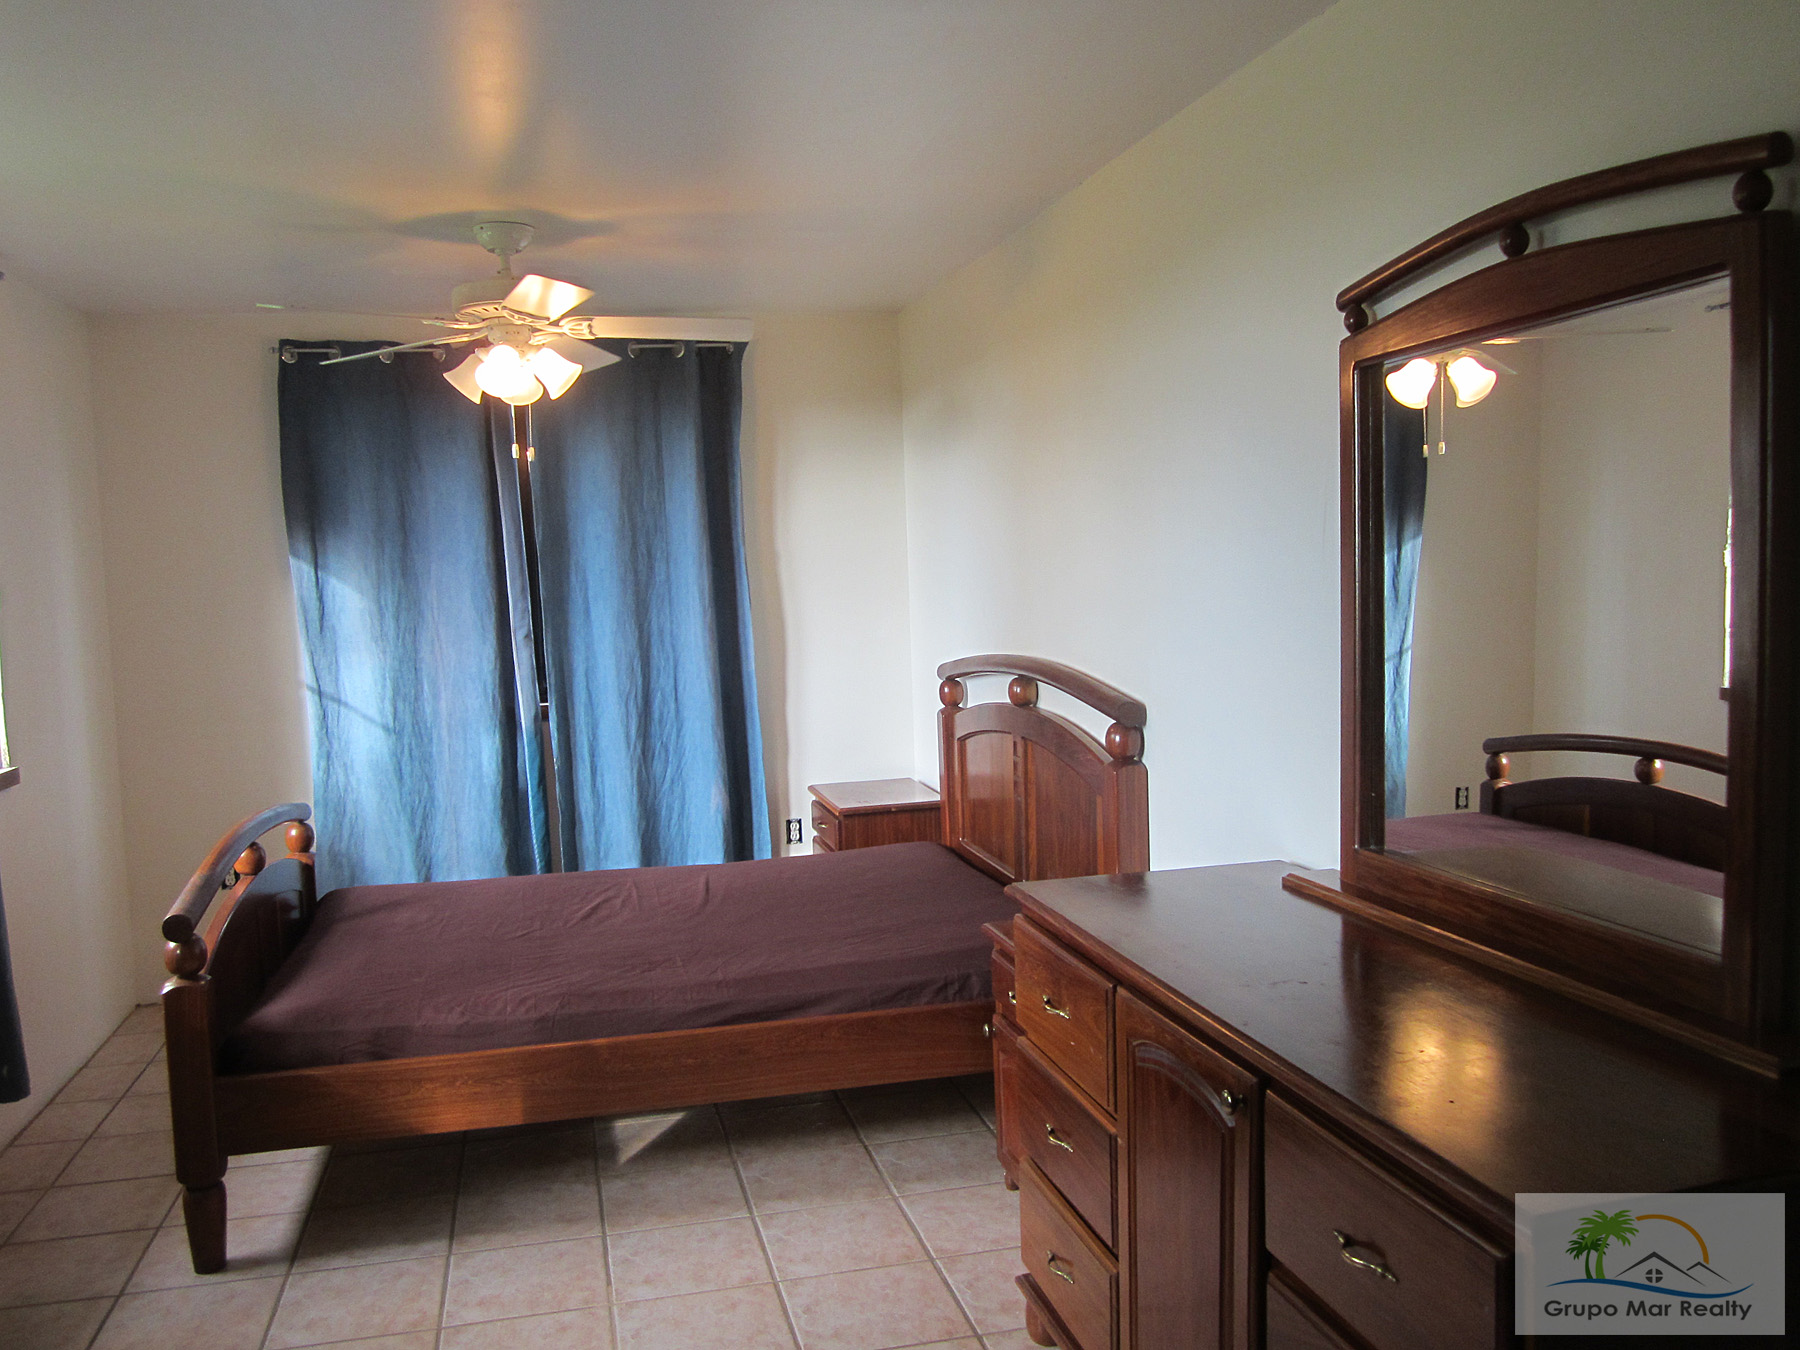 Hill View Rental Home with Apartment | Grupo Mar Realty ...